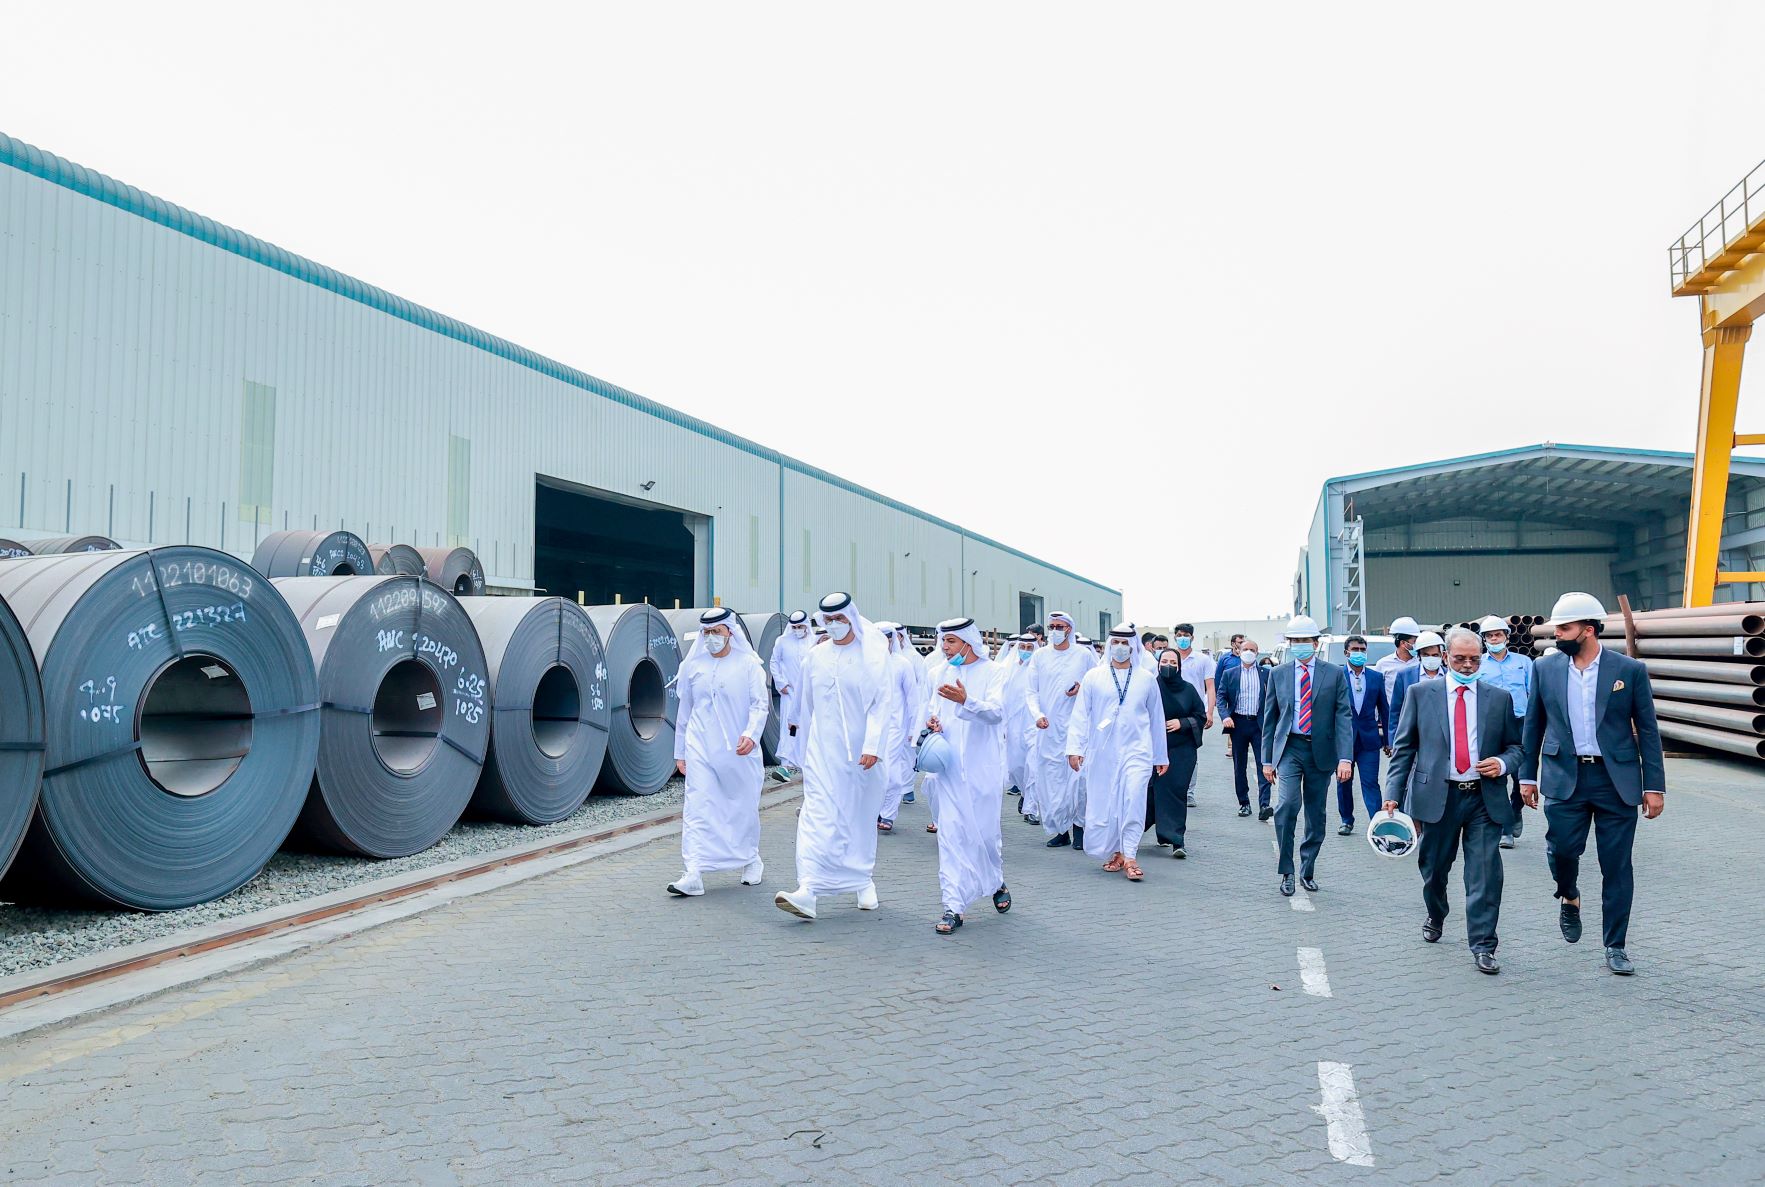 UAE Minister of Industry and Advanced Technology briefed on expansion plans and growth opportunities for companies in the Industrial City of Abu Dhabi 